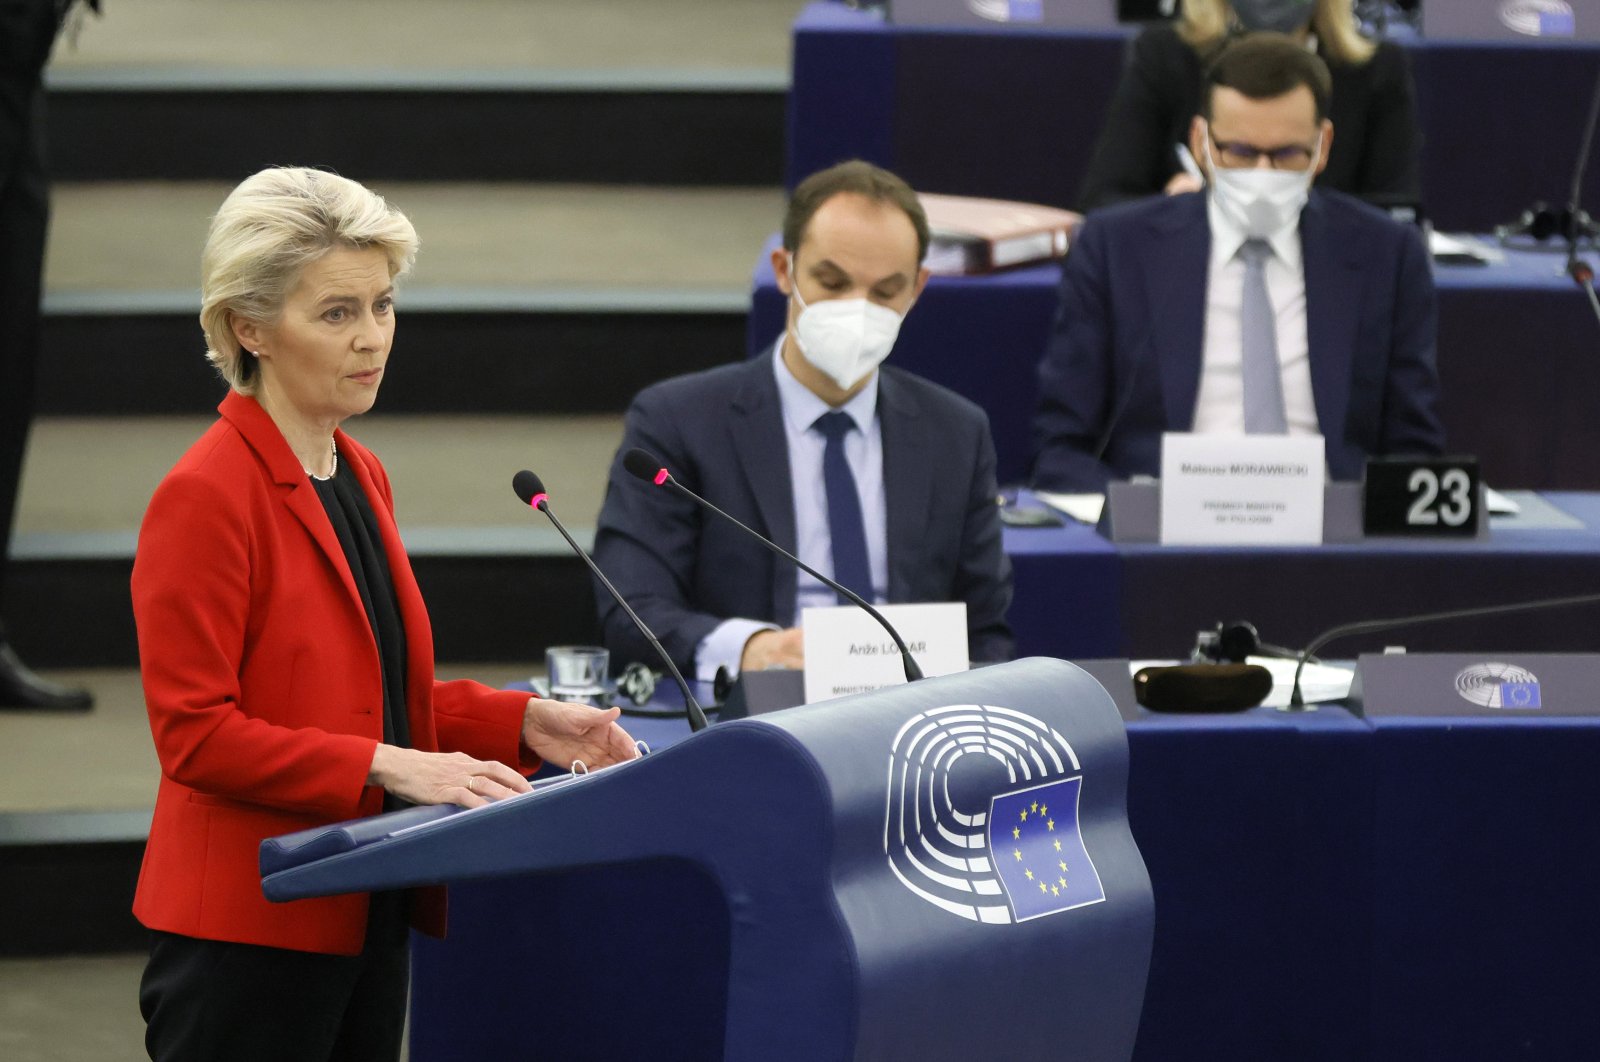 President of the European Commission Ursula von der Leyen delivers a speech during a debate on "the Rule of law crisis in Poland and the primacy of EU law" during a session of the European Parliament in Strasbourg, France, Oct. 19, 2021. (EPA-EFE Photo)